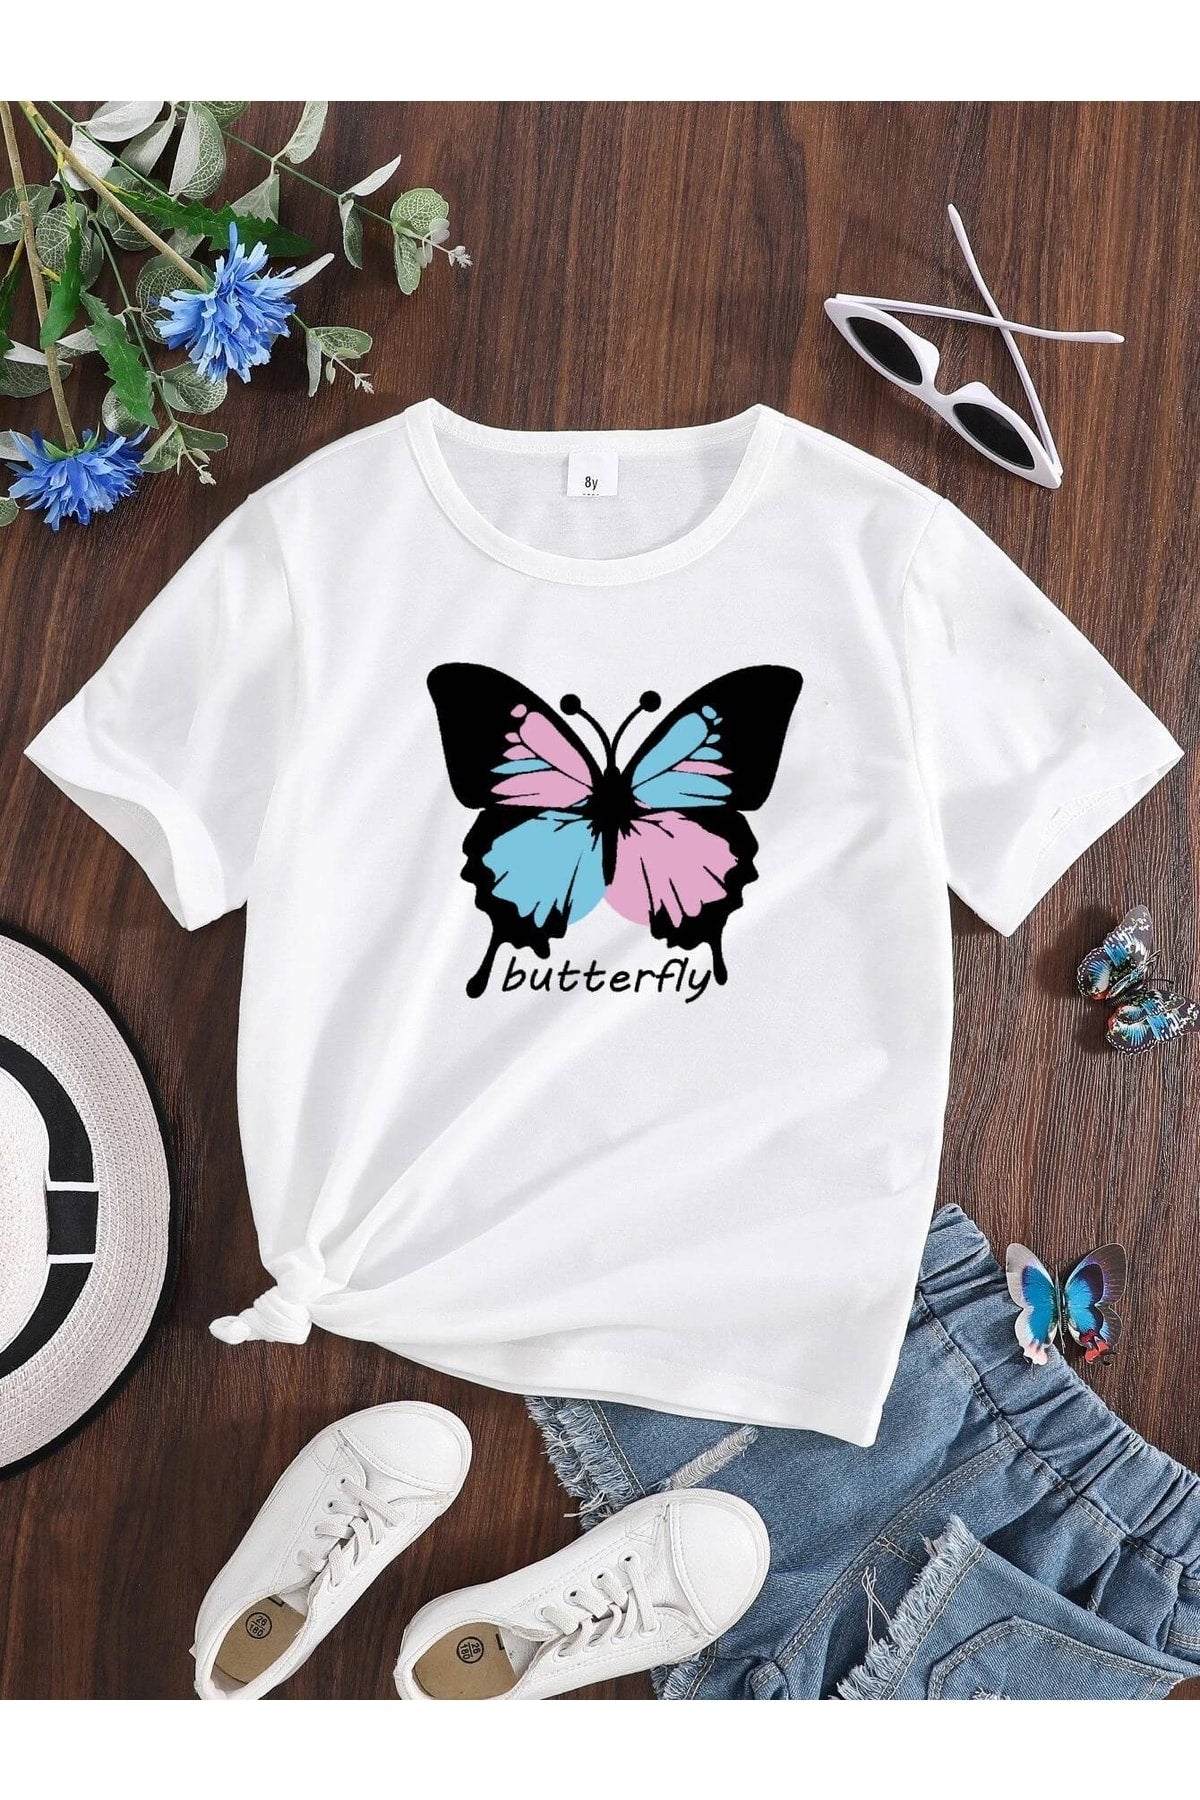 Crew Neck New Butterfly Printed Girl's T-Shirt